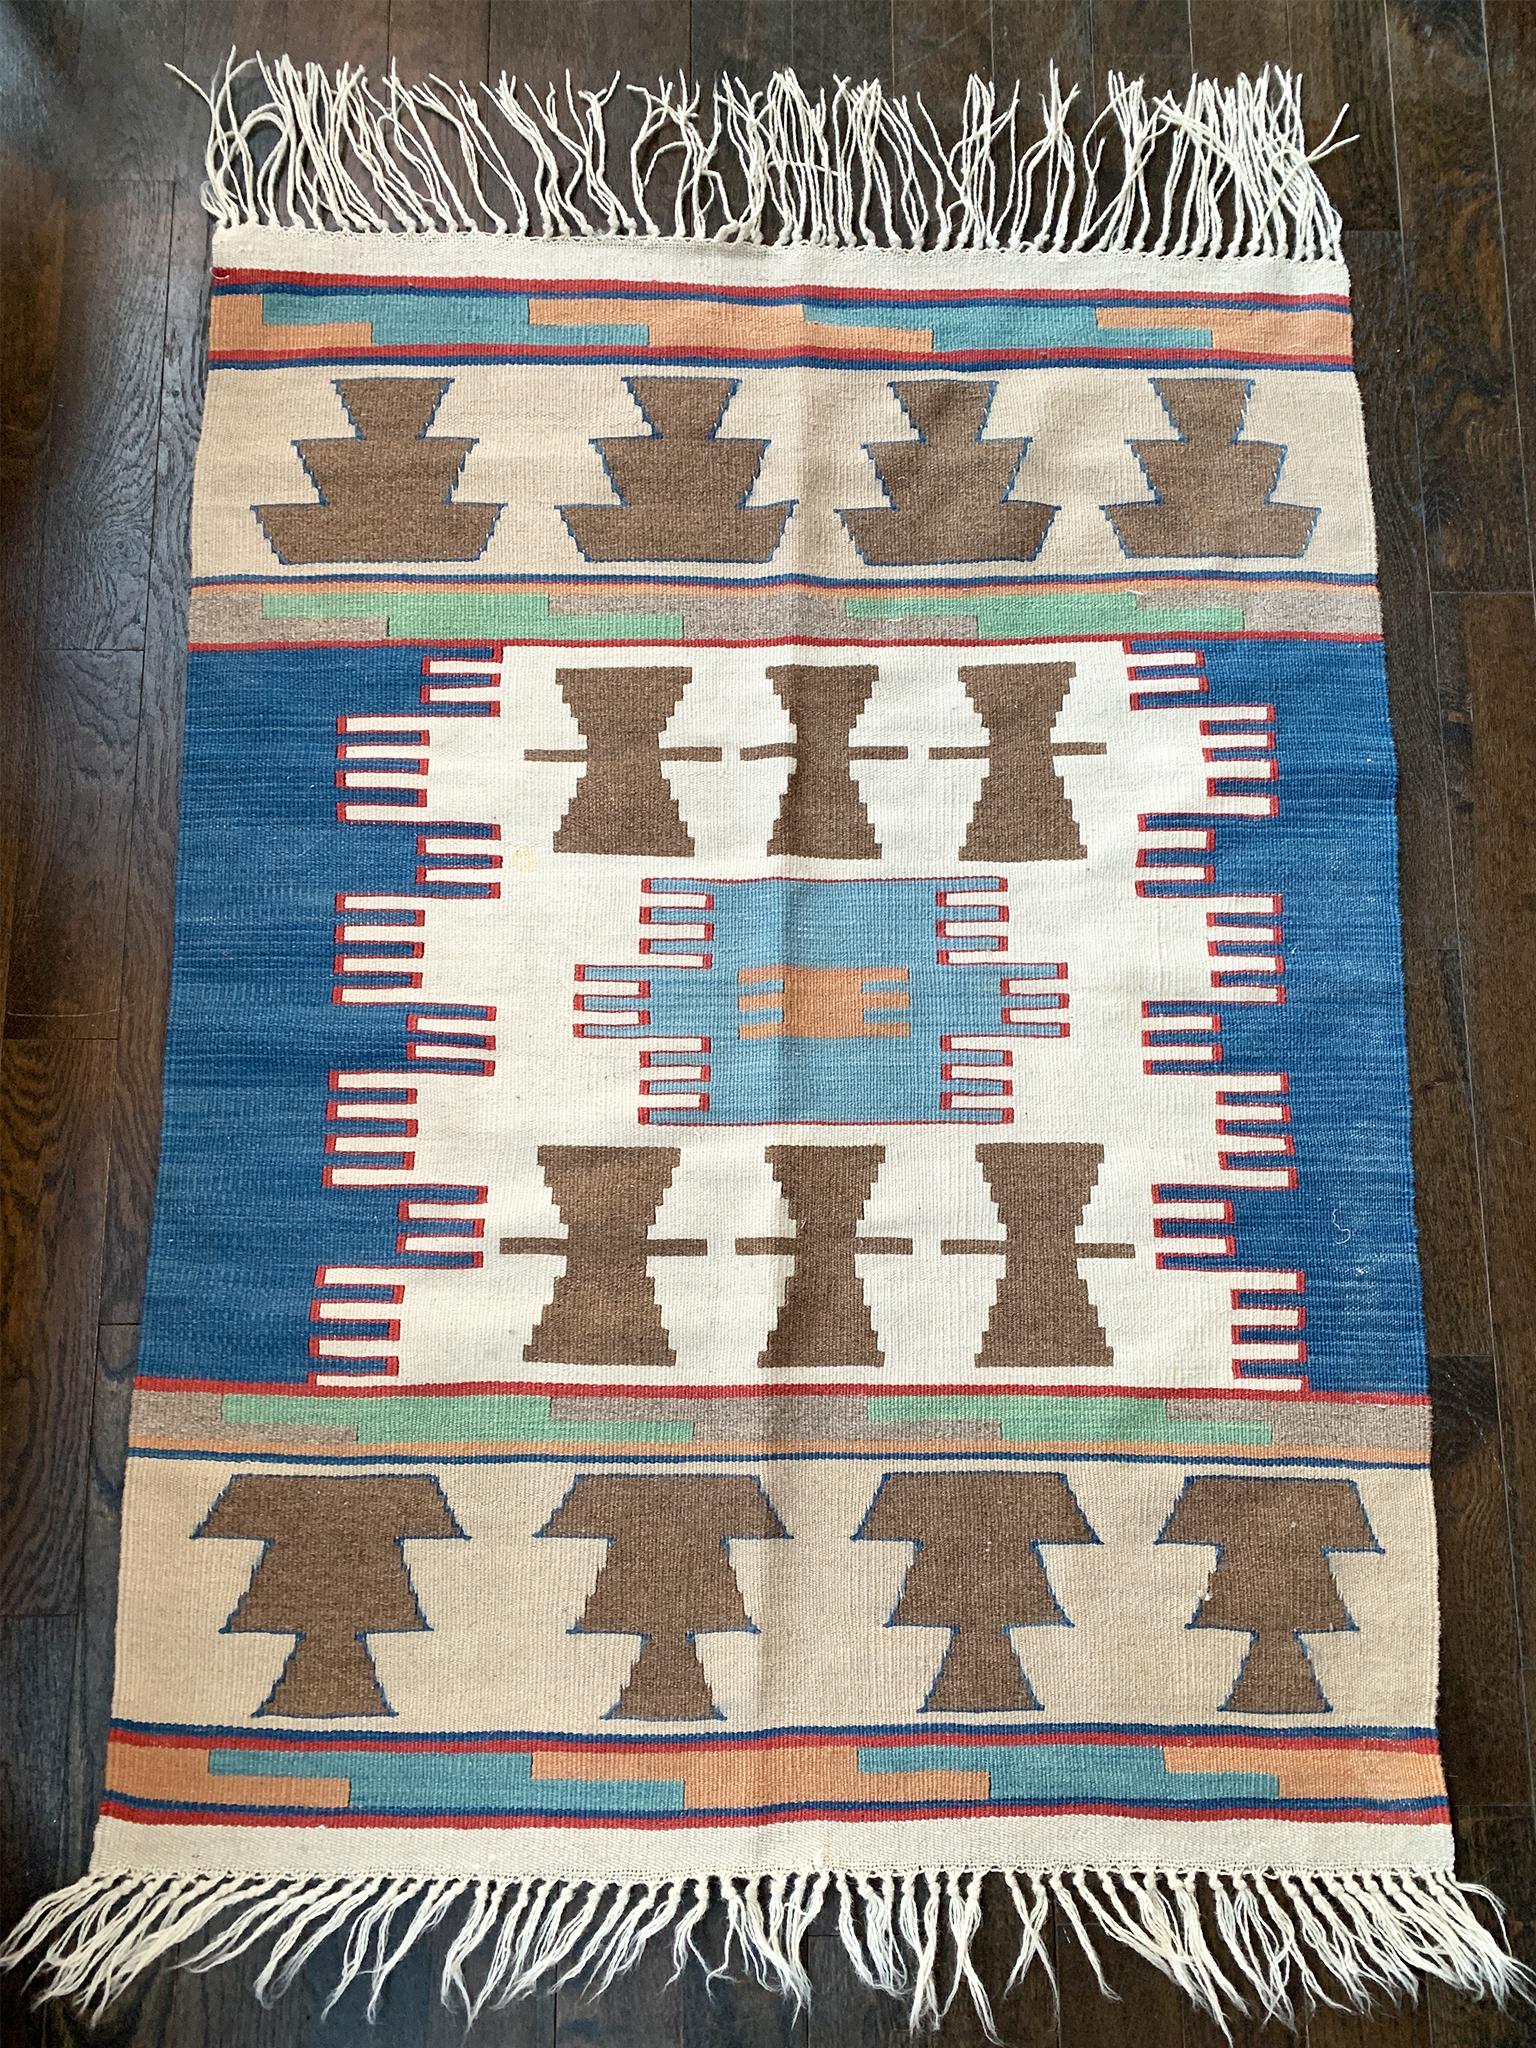 Navajo rug with an earthy palette of light and dark blues, red, pale green, brown, tan, peach, and ivory. 

Dimensions:
3' x 4' (36 in. x 48 in.)

Condition notes:
In good condition. Light wear to pile and minor staining, all consistent with the